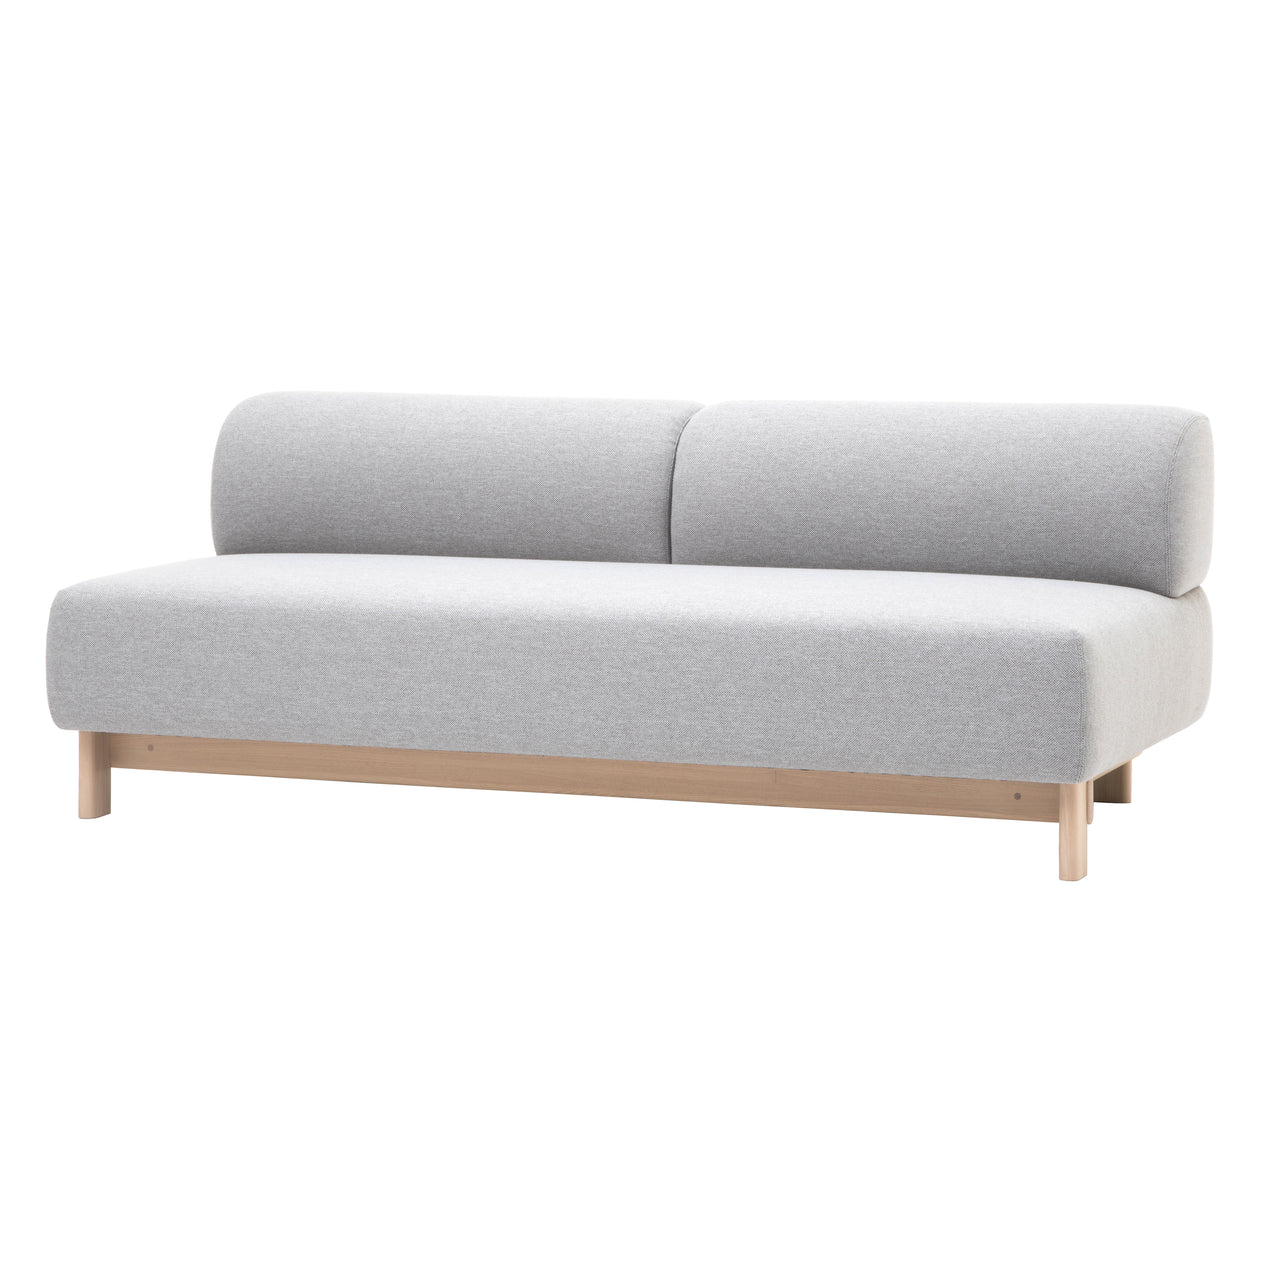 Elephant 3 Seater Bench: Pale Natural